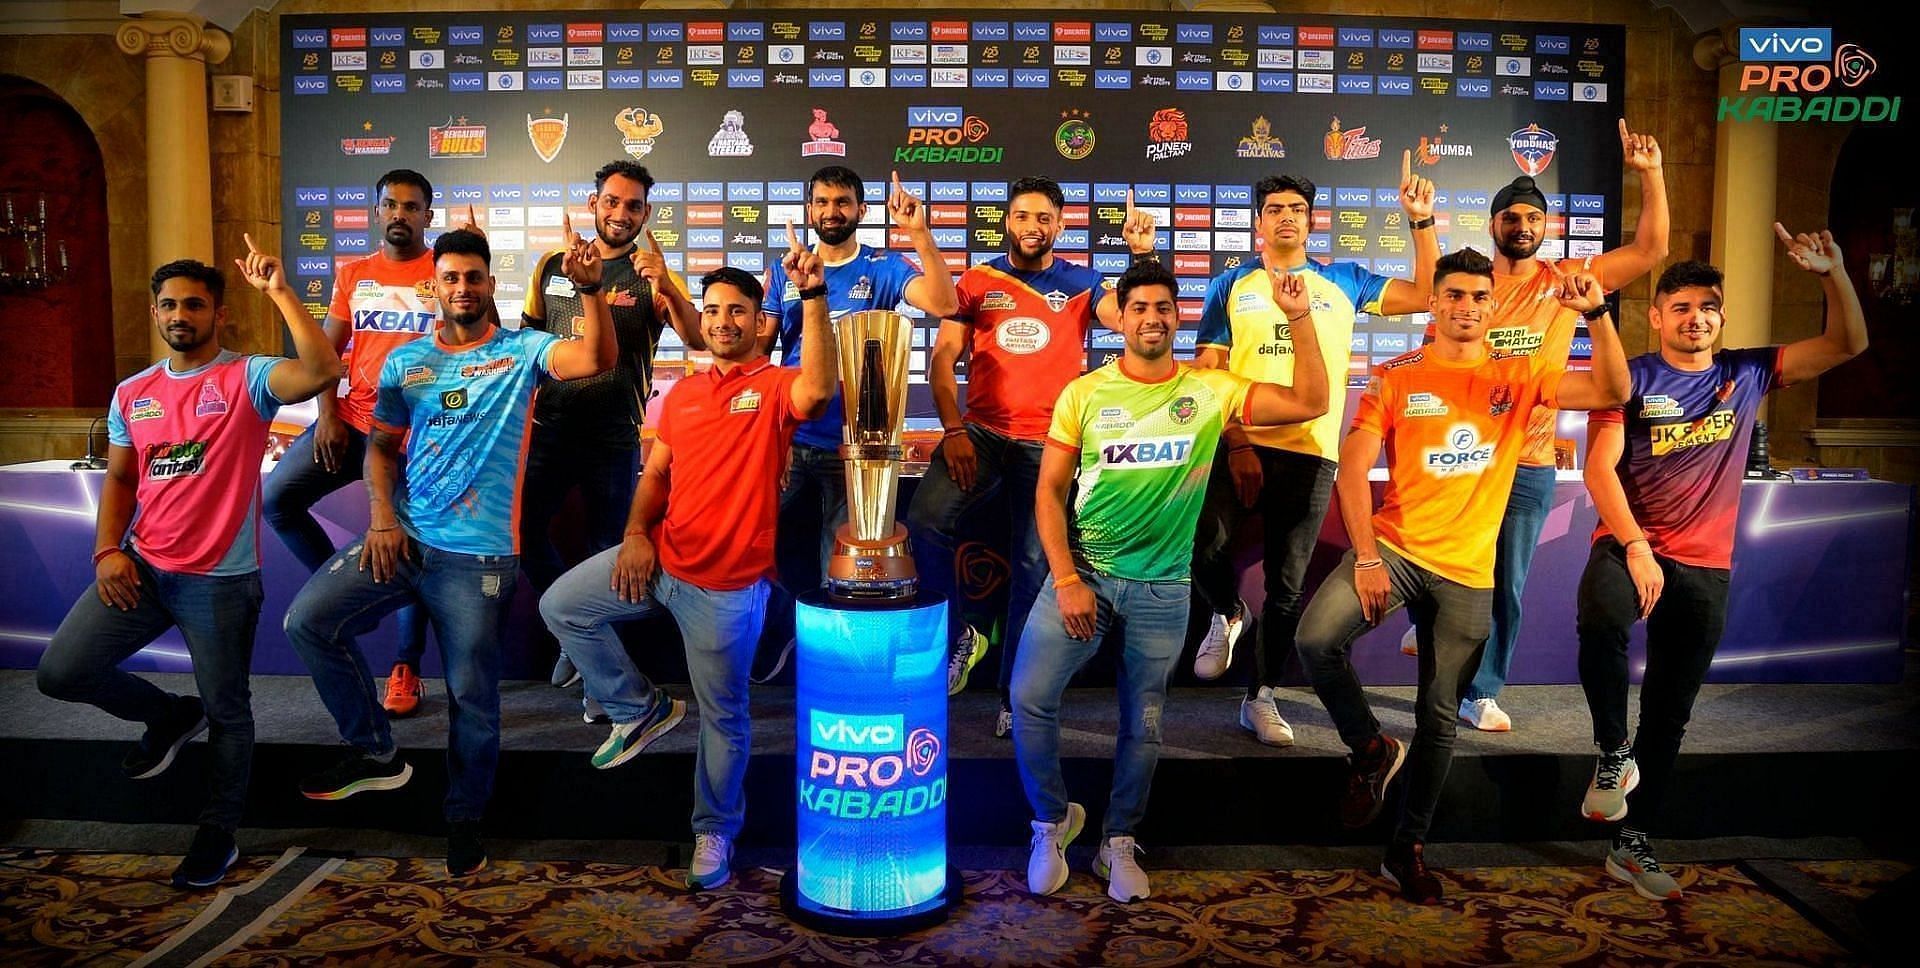 Two matches will happen in Pro Kabaddi 2022 tomorrow (Image: PKL)